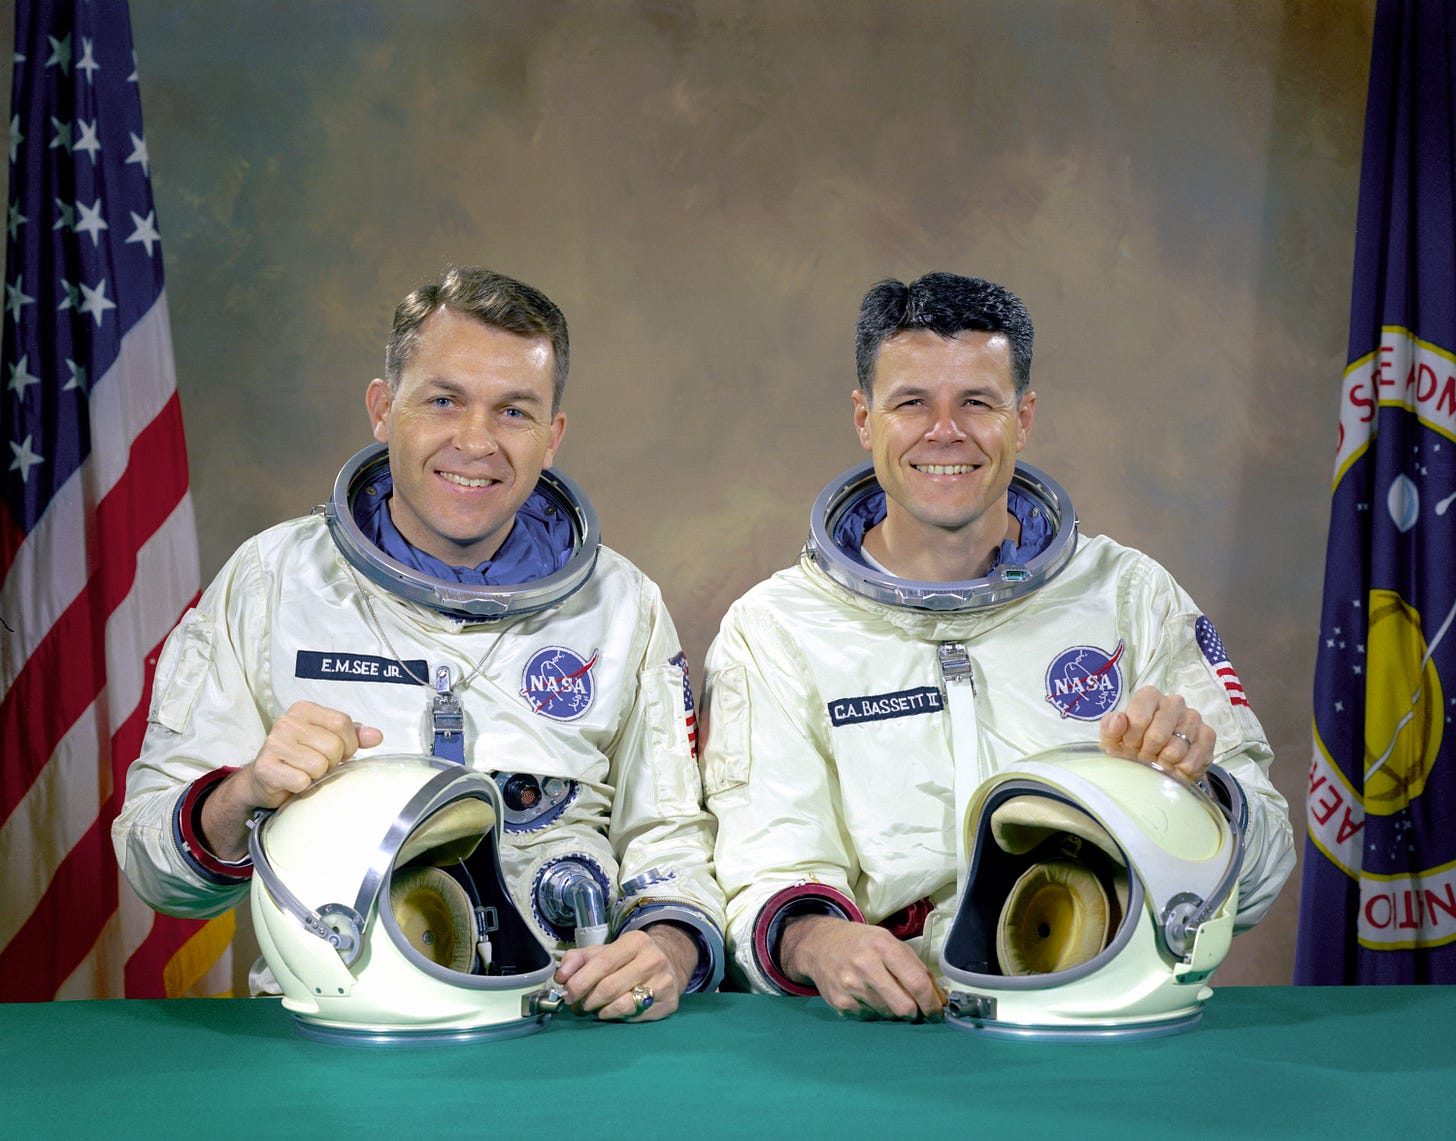 Official NASA photo of Elliot See and Charles Bassett, in spacesuits, but with their helmets on a table in front of them.  An American flag and a NASA flag provide a backdrop.